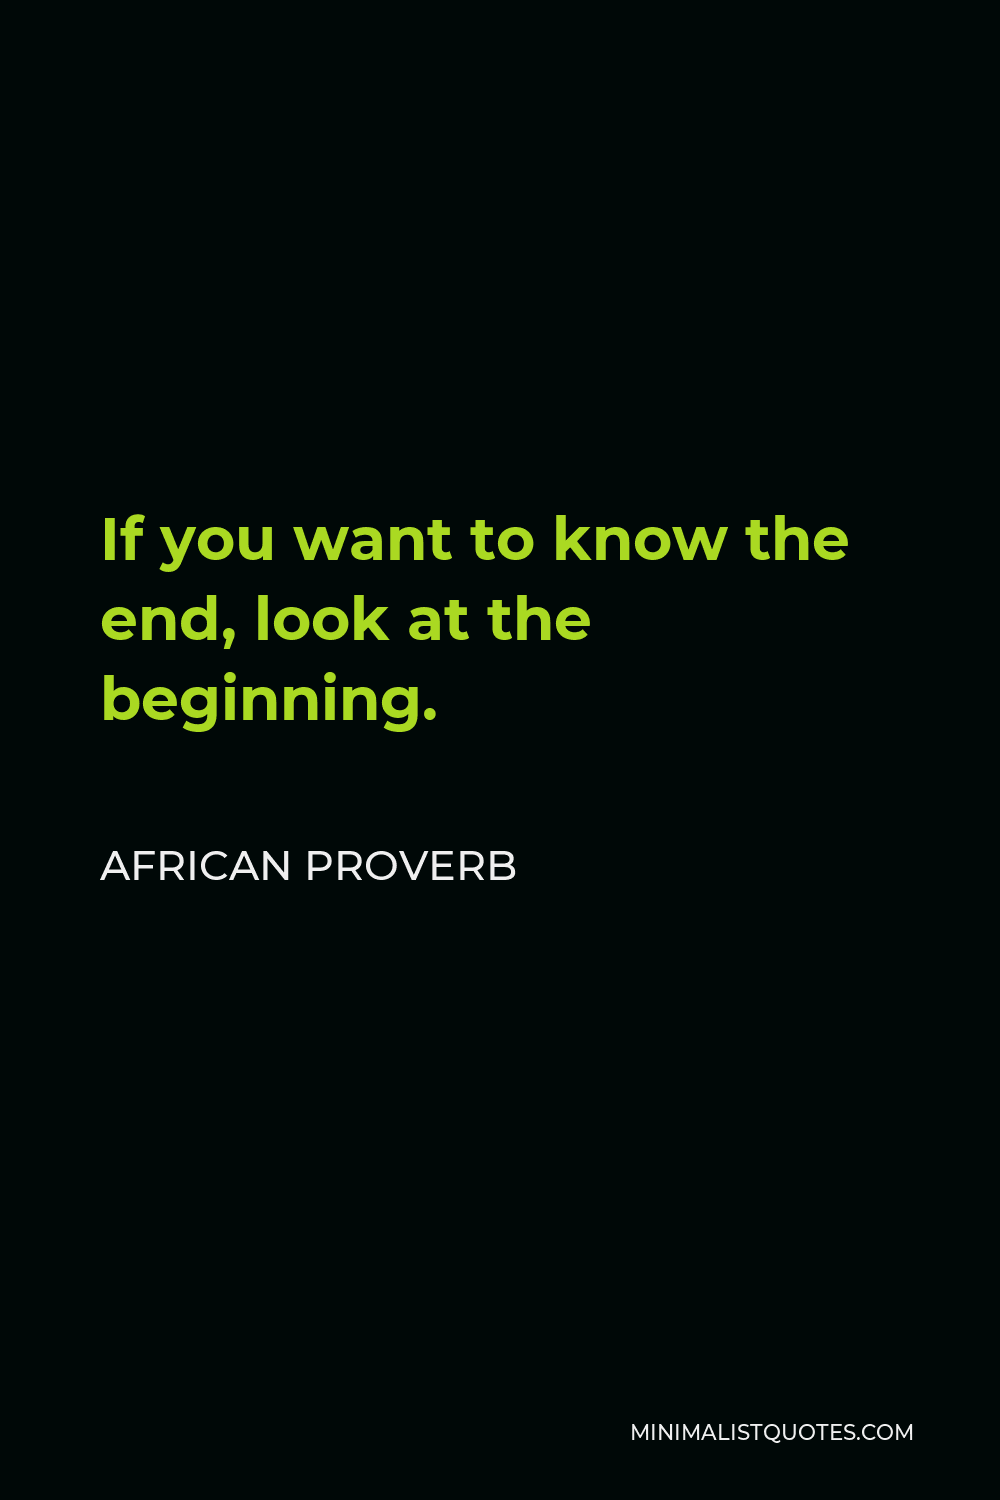 African Proverb Quote - If you want to know the end, look at the beginning.